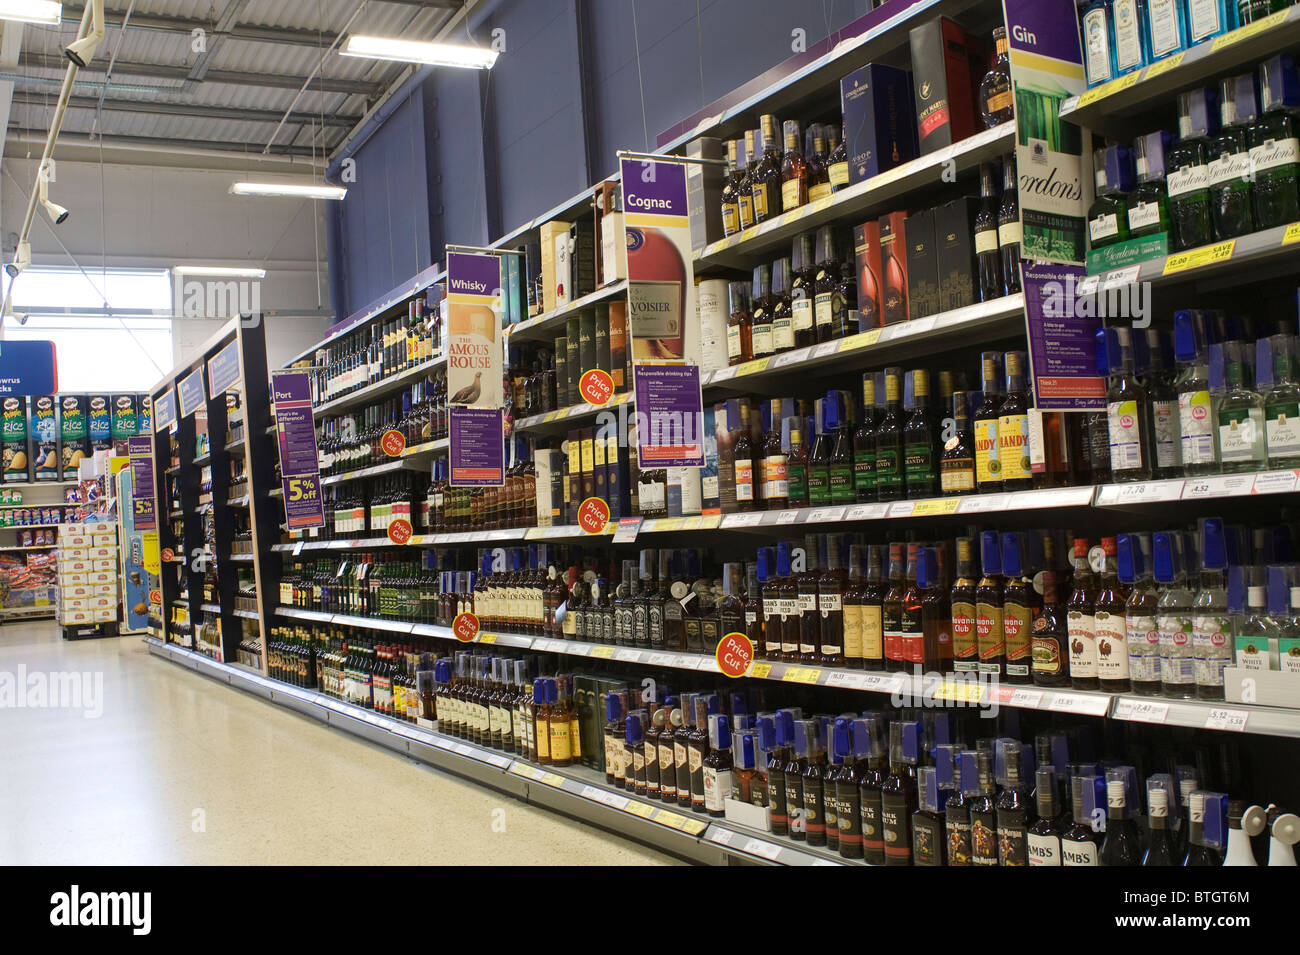 Wales UK Wines and spirits section of a large Supermarket Stock Photo